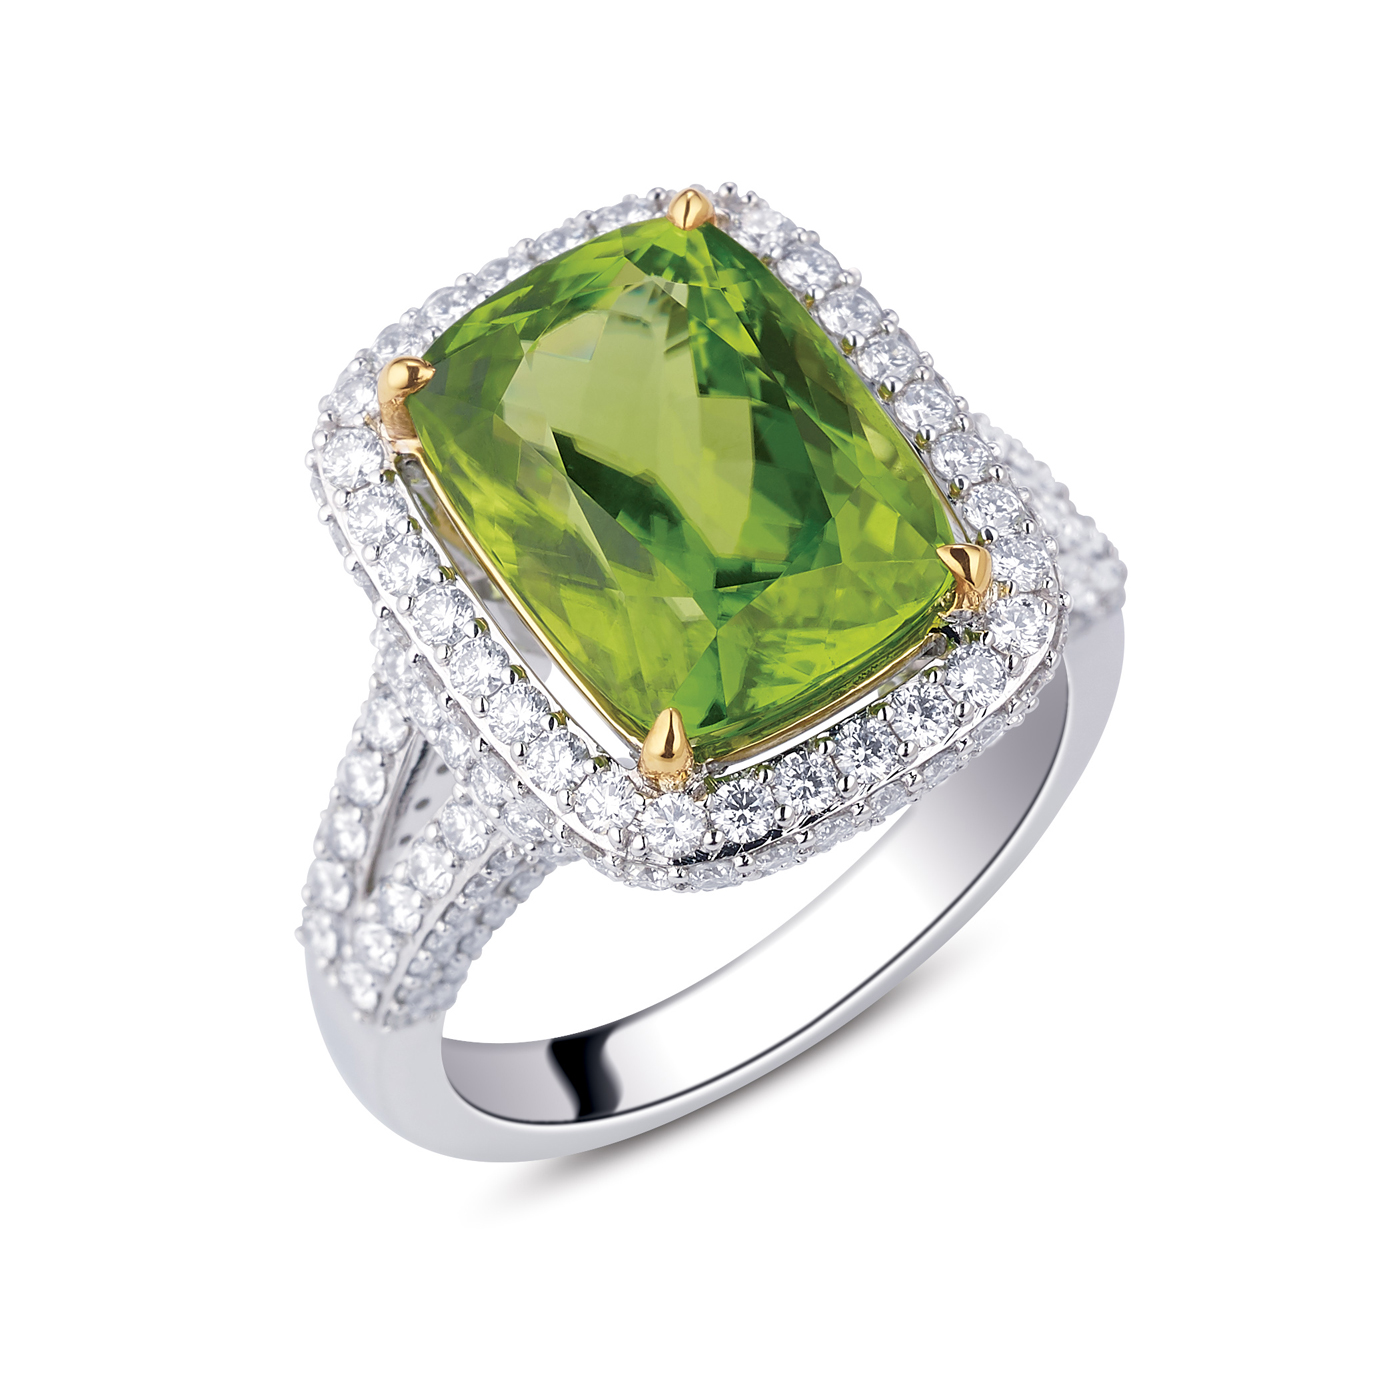 18-KARAT (750) WHITE AND YELLOW GOLD RING SUITE WITH DIAMONDS AND PERIDOT BY MOUAWAD